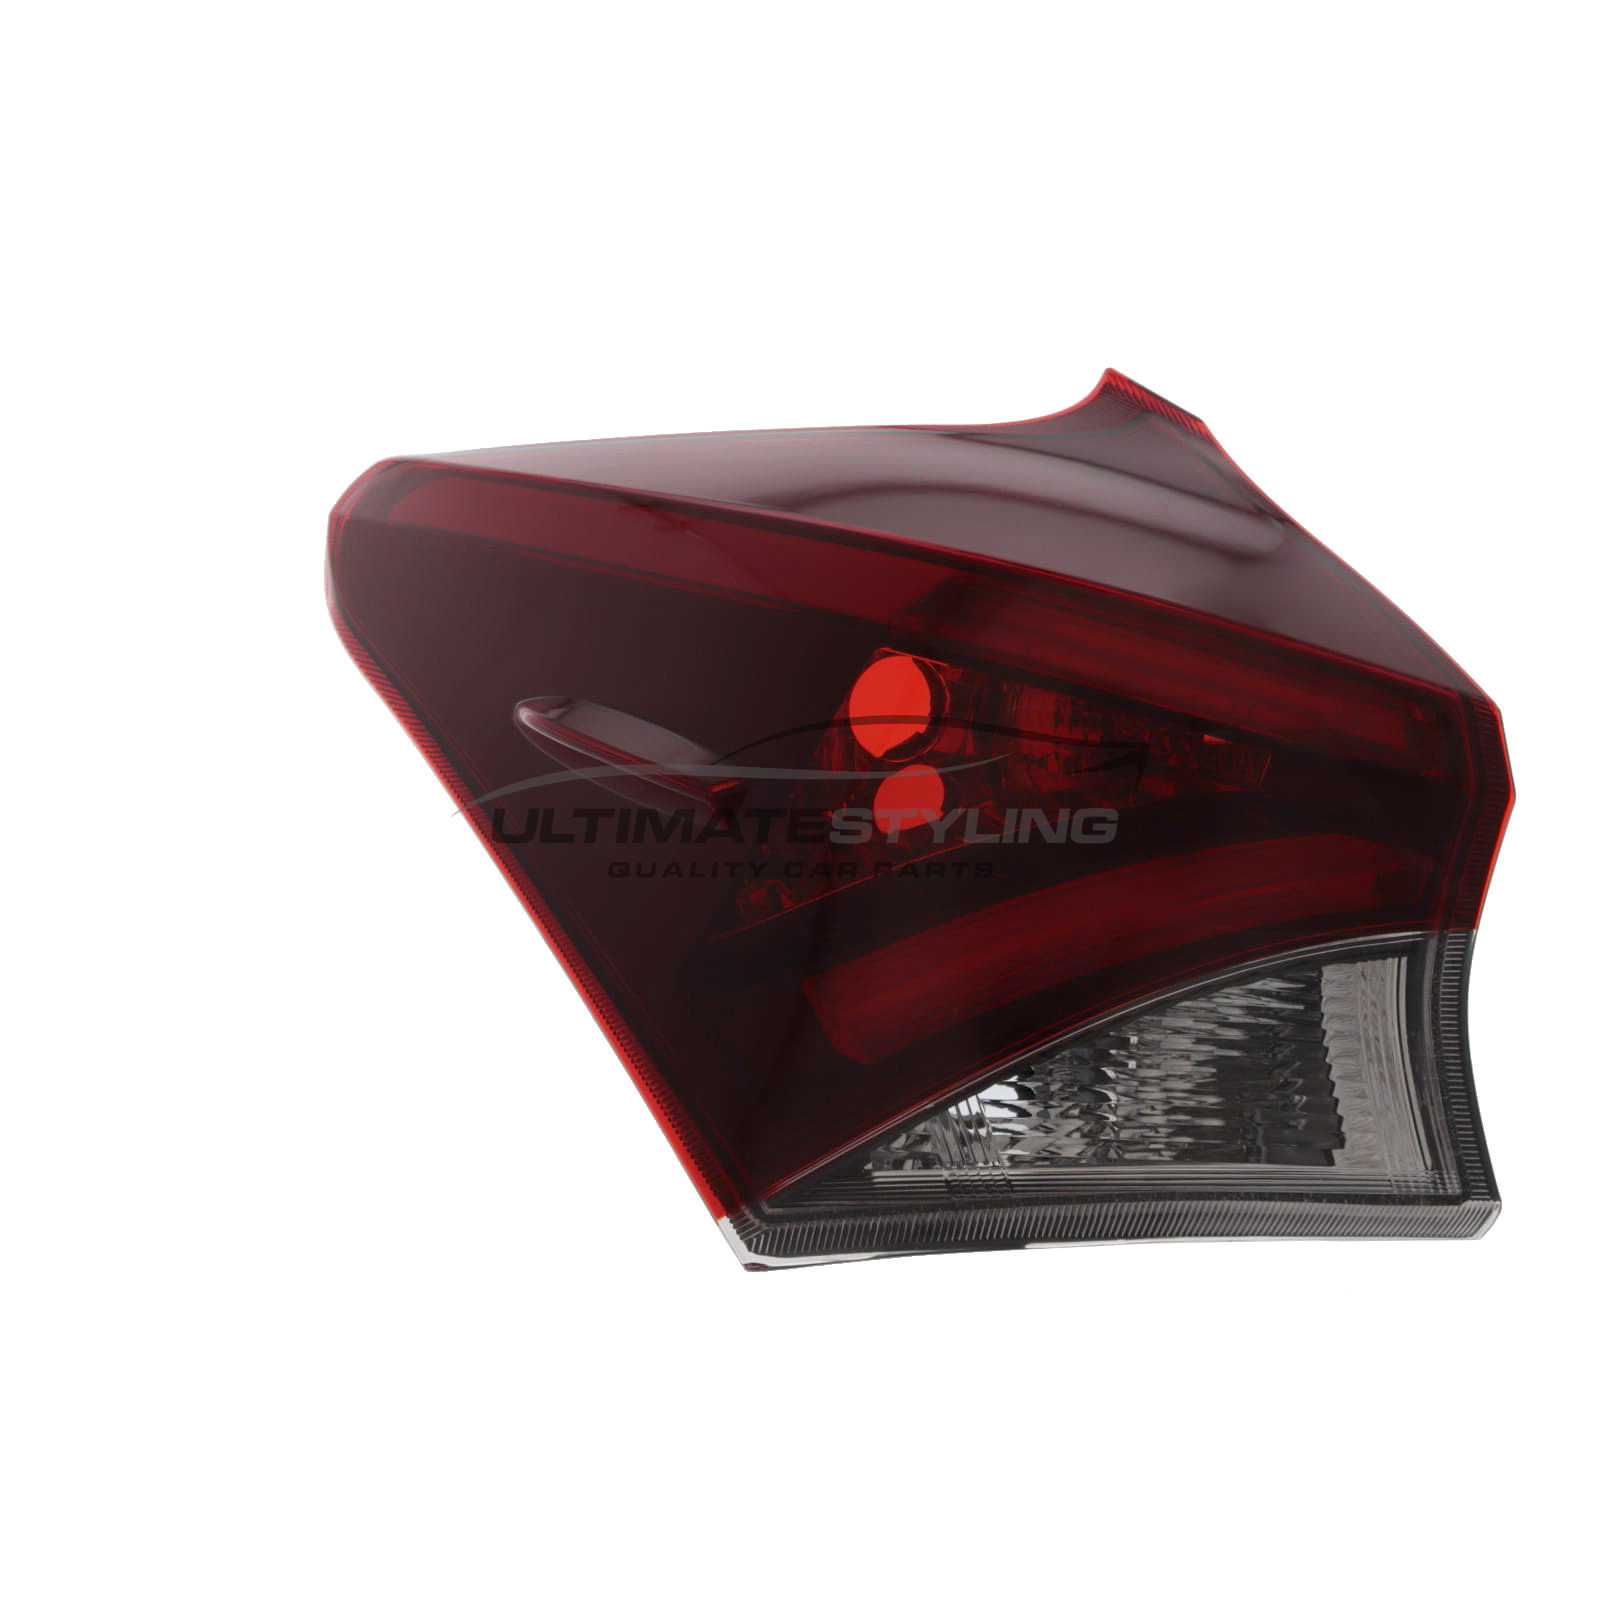 Toyota Auris Rear Light / Tail Light - Passenger Side (LH), Rear Outer (Wing) - LED